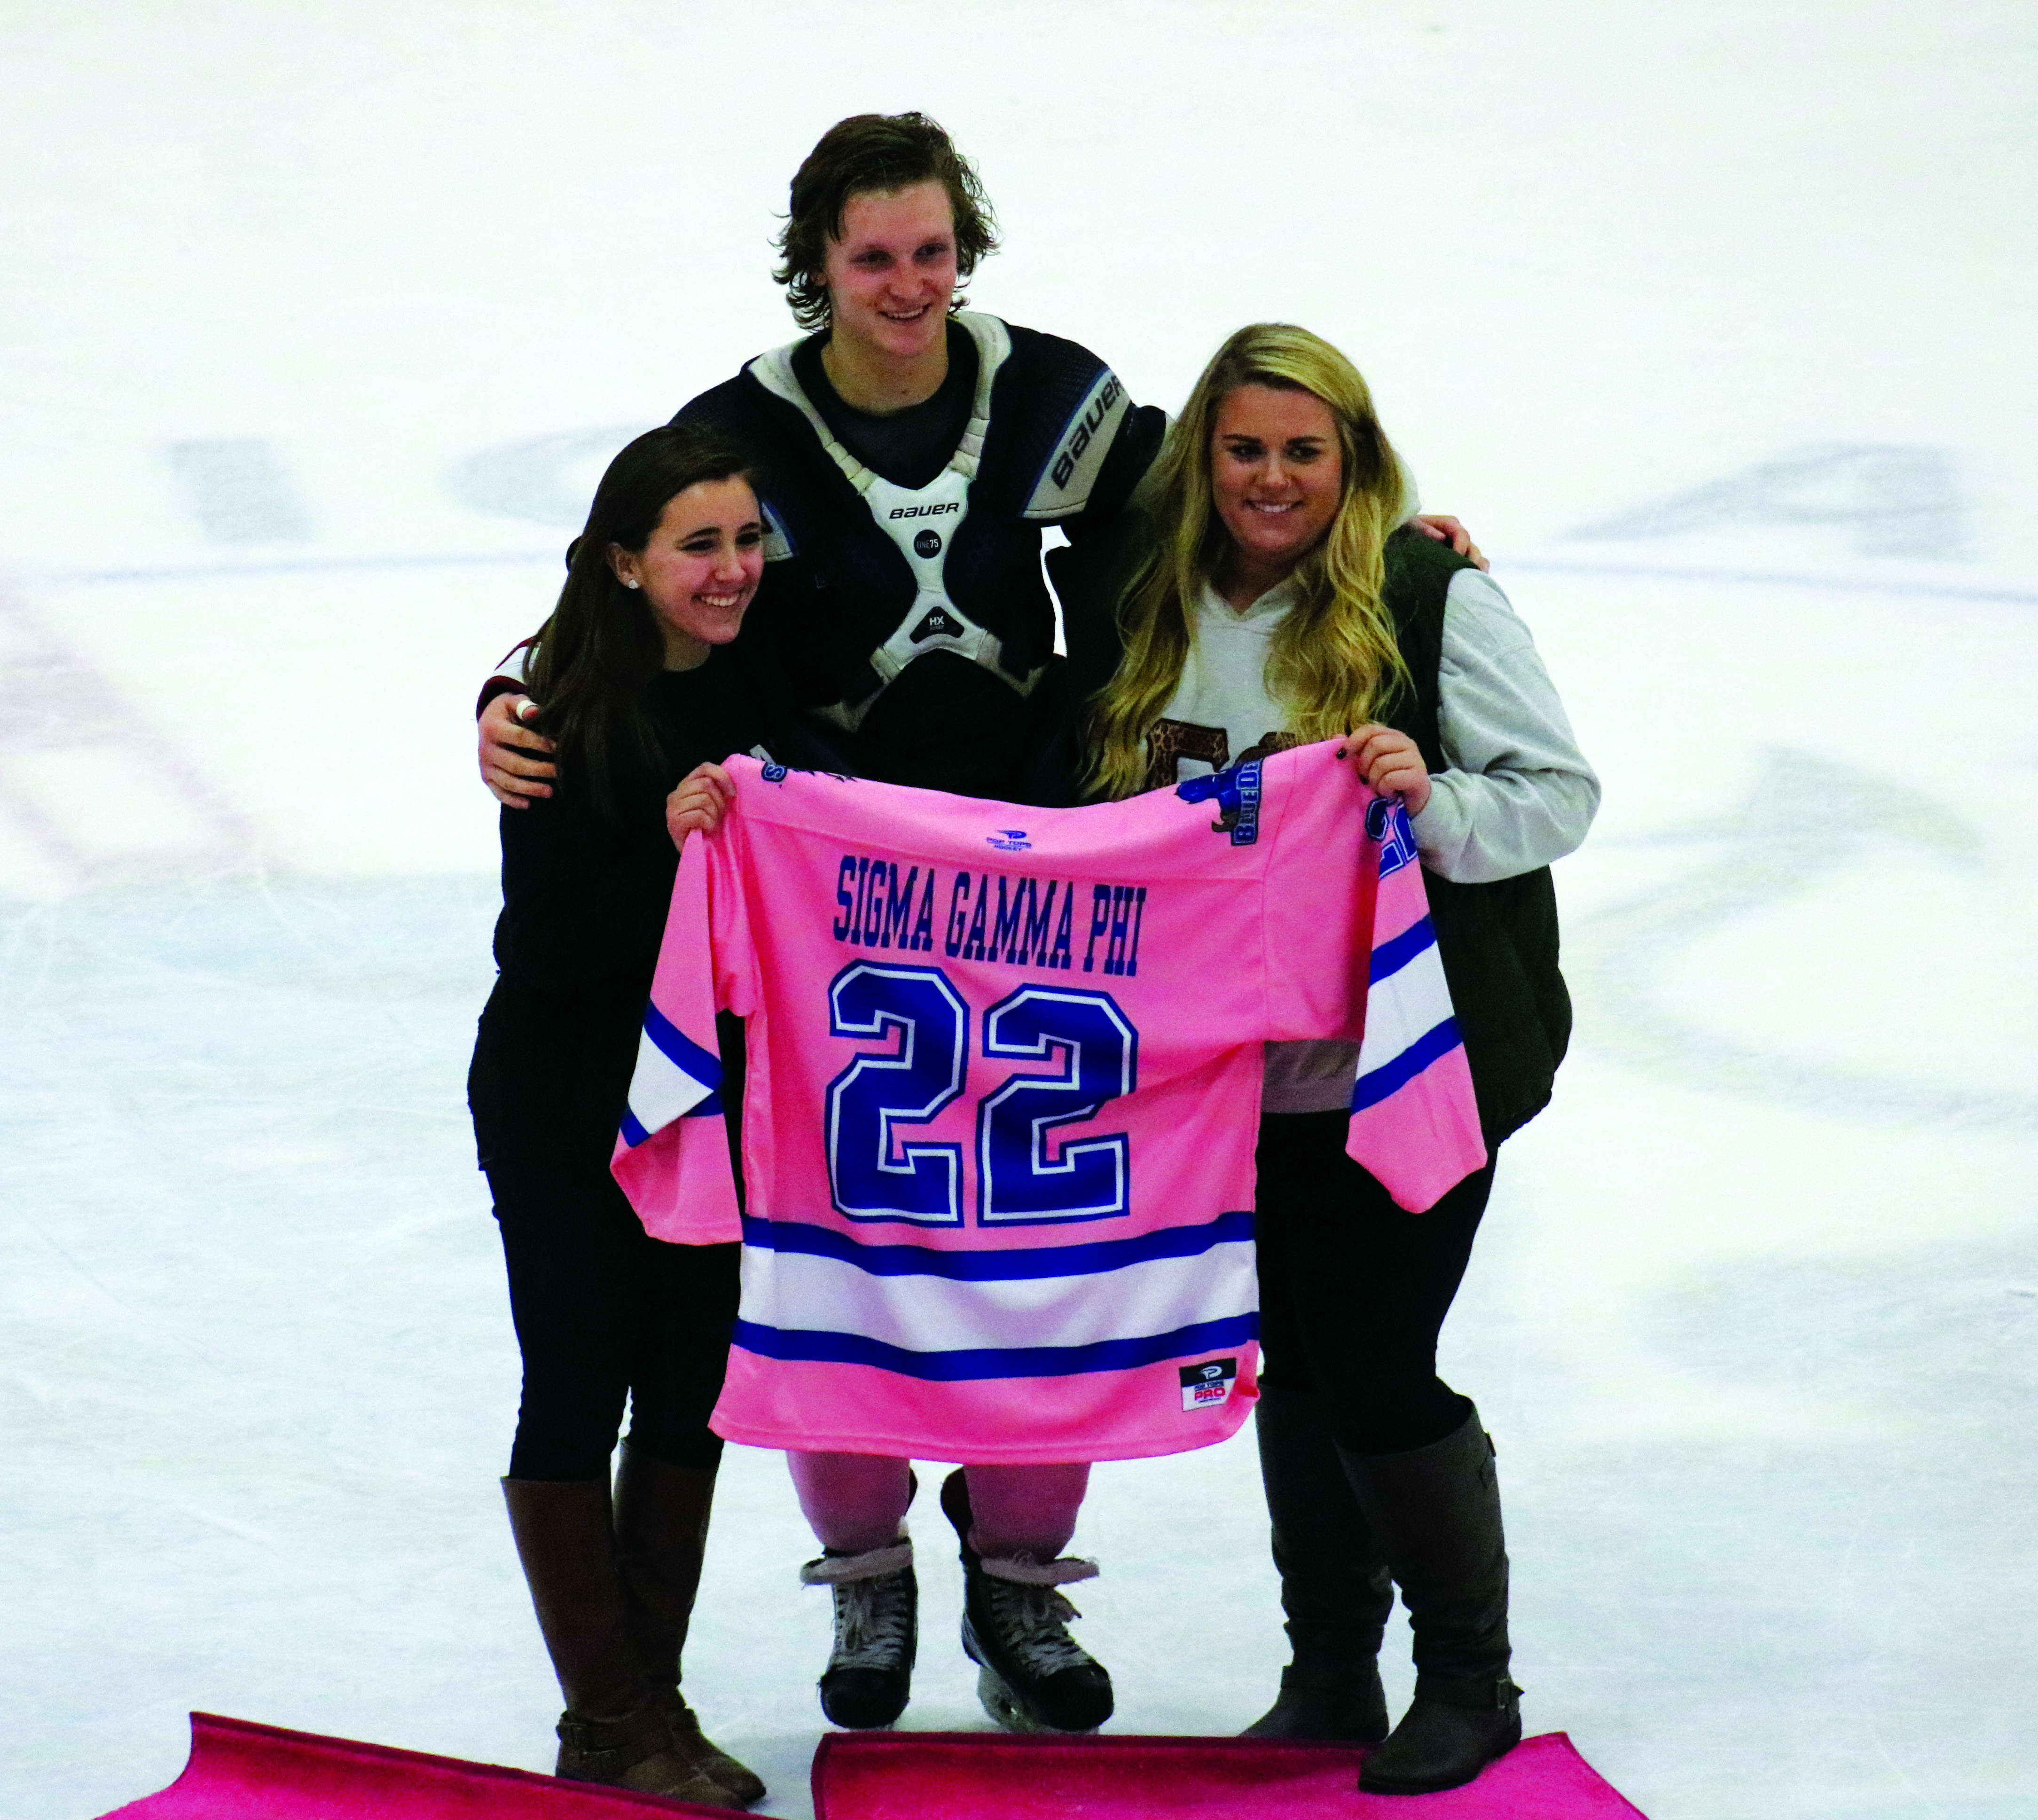 Allison Plunkett (left) and Sarah Doherty (right) accept Jimmy Morgan’s (middle) Pink the Rink jersey for Sigma Gamma Phi.Photo by Meghan Guattery